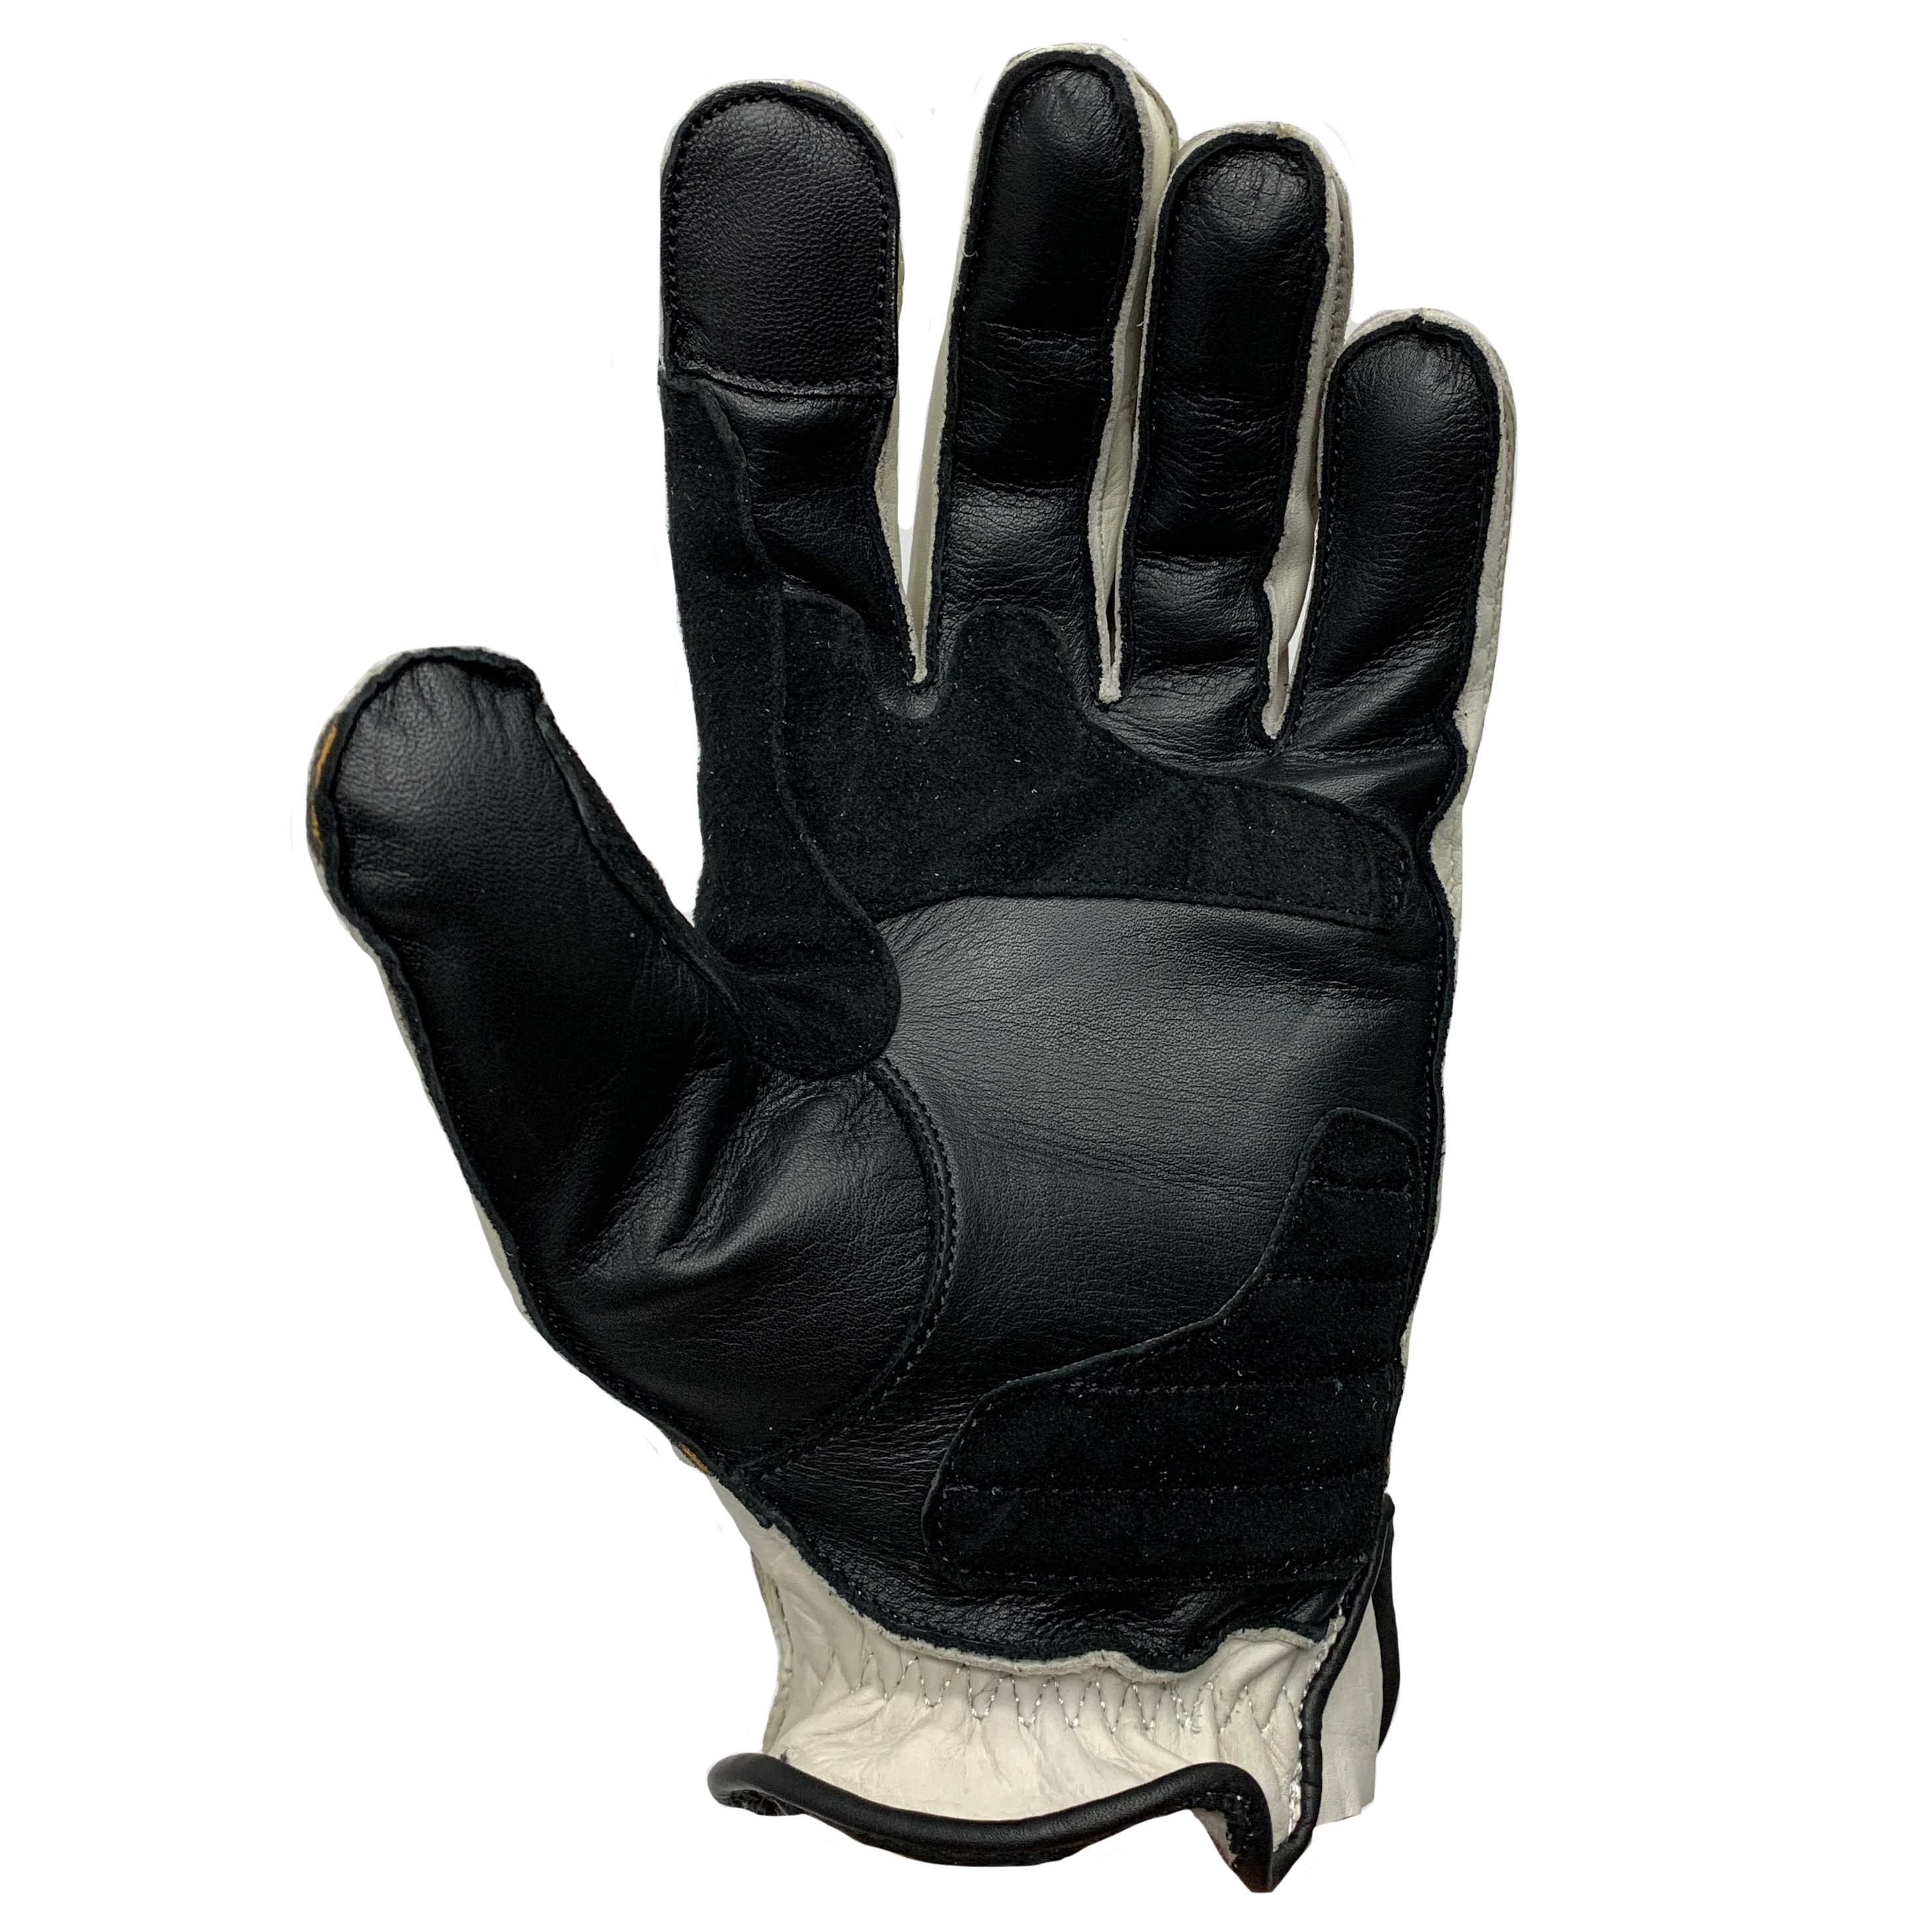 TCB Glove - Limited Release